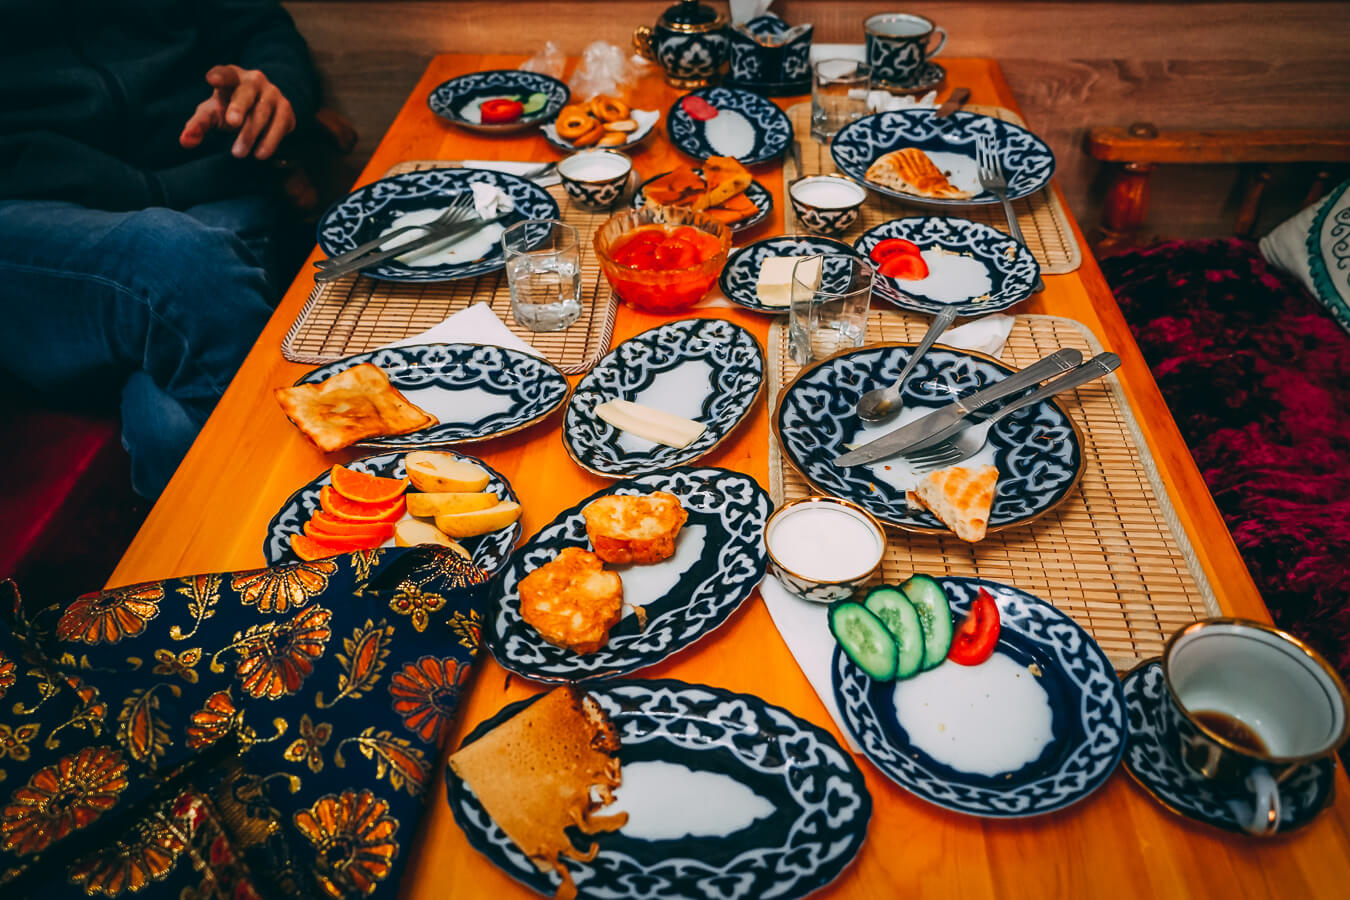 Table full of dishes in Central Asia